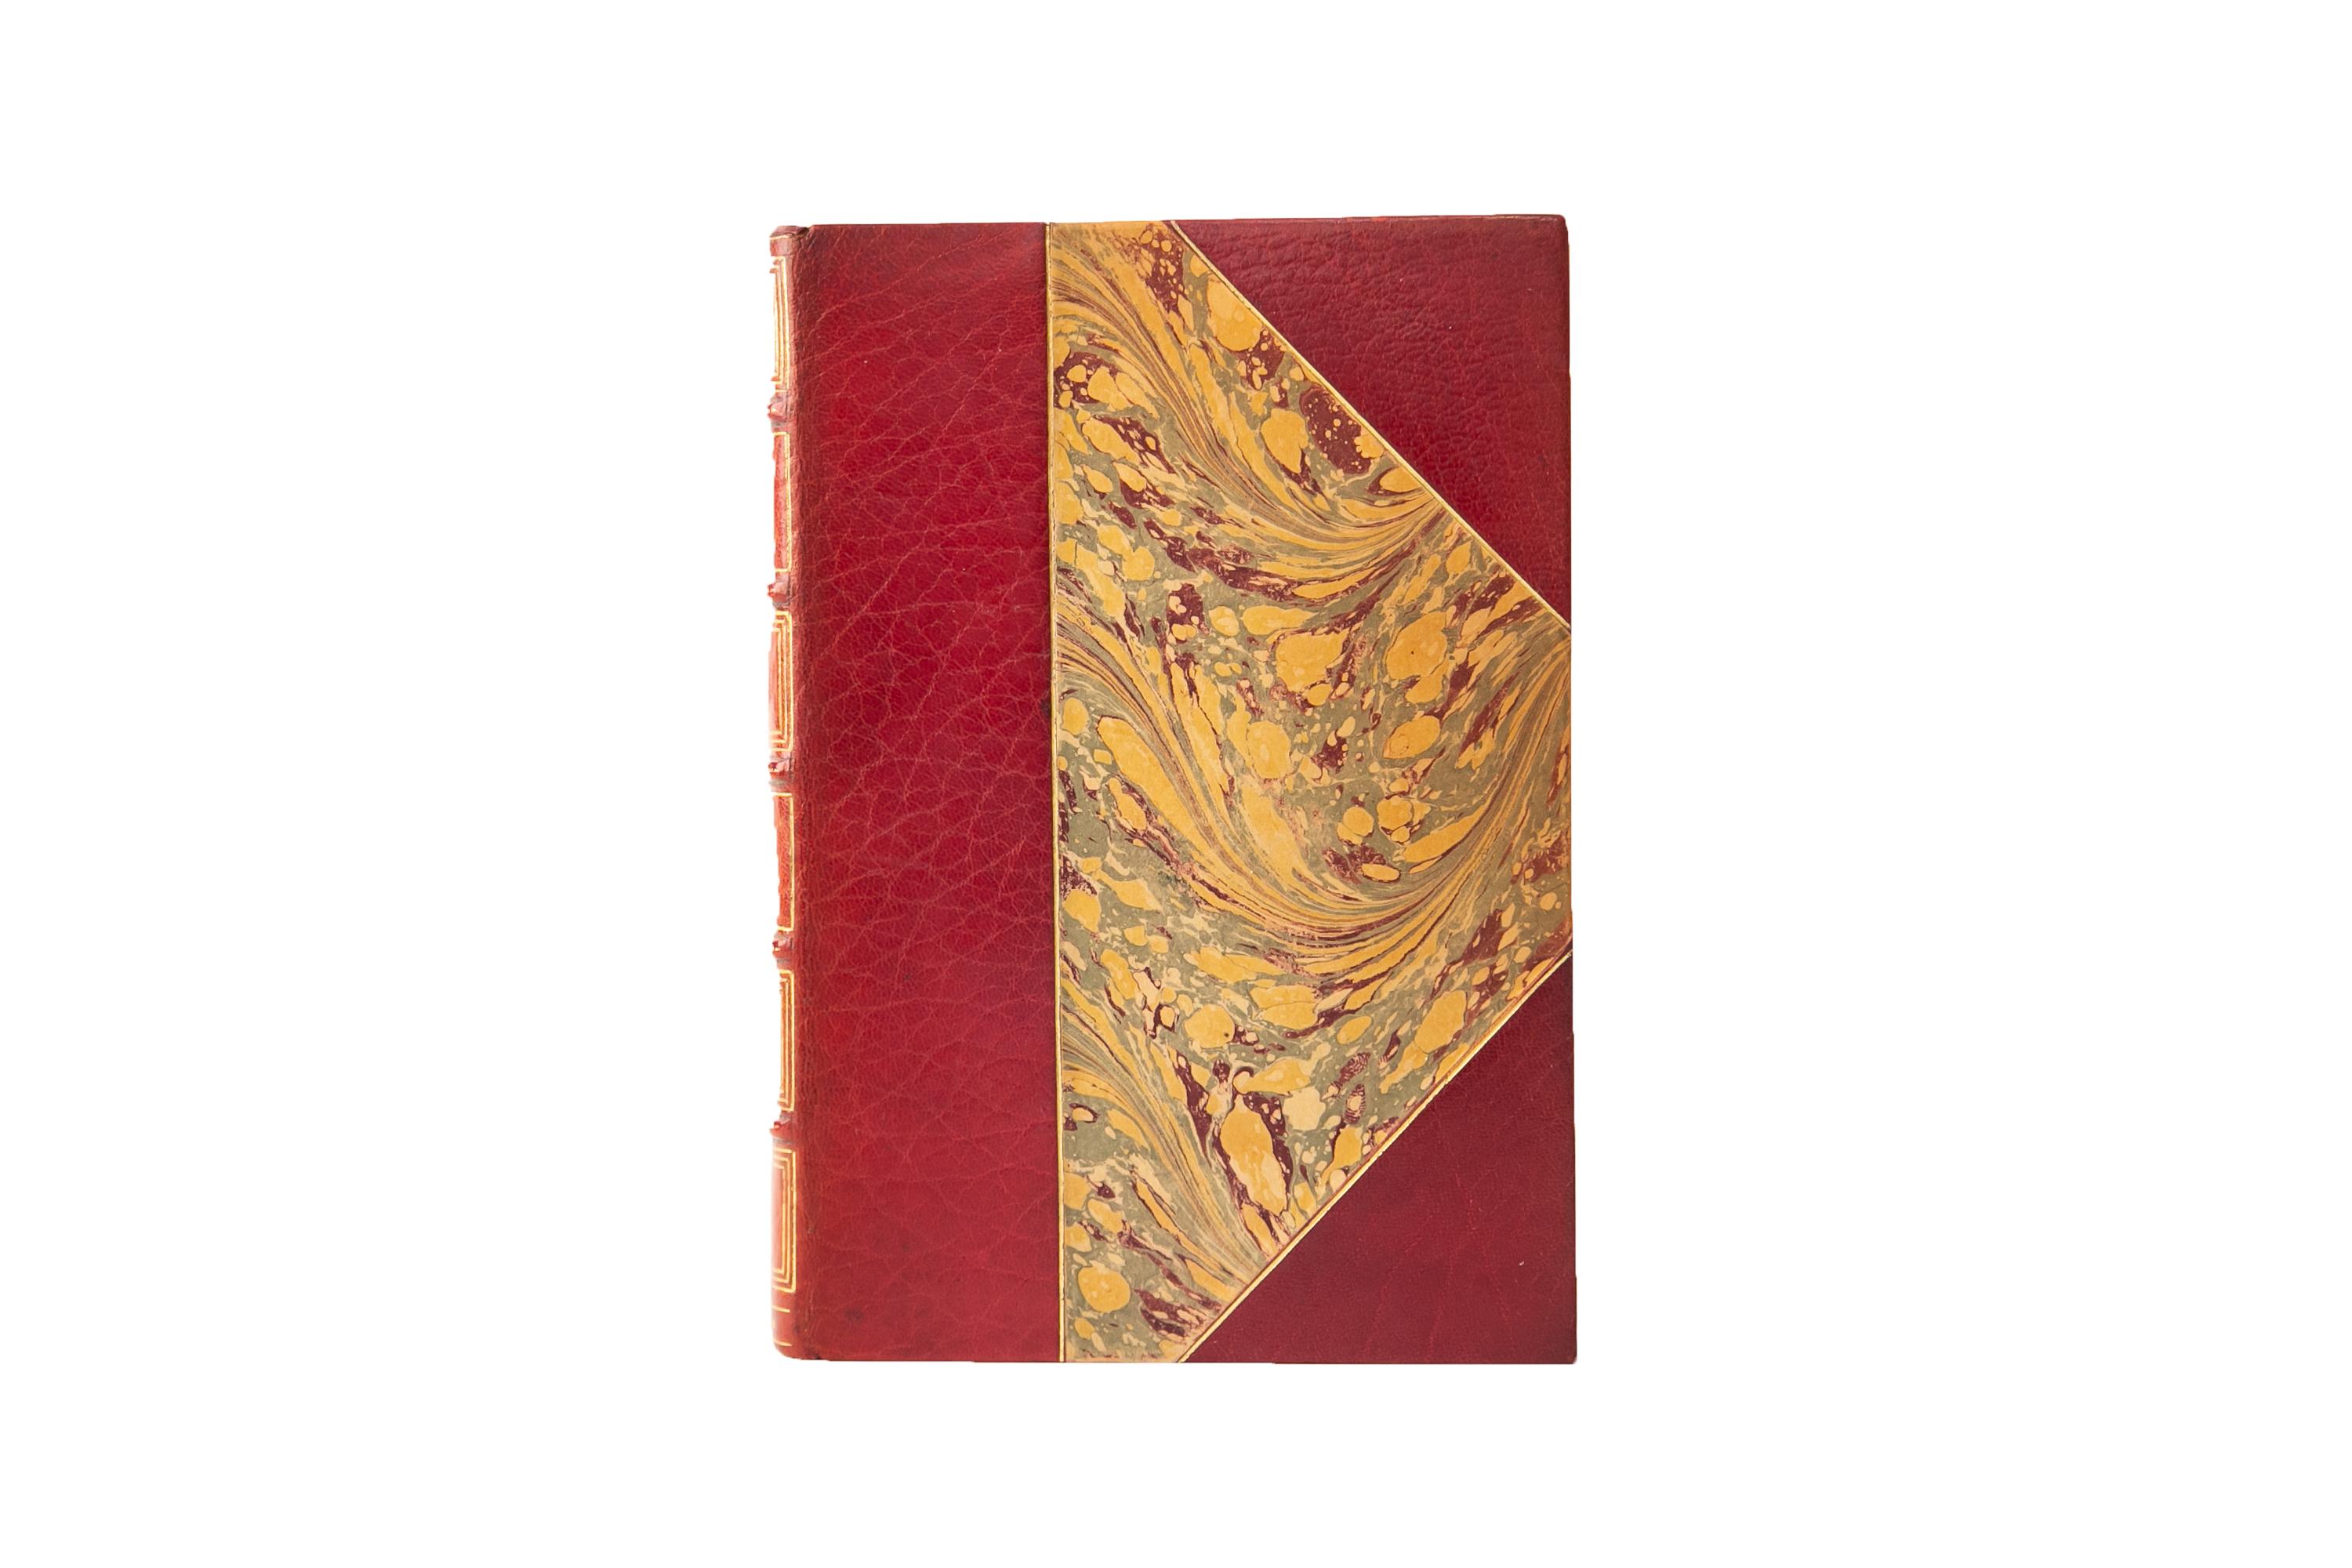 28 Volumes, Count Tolstoy, the complete works. Edition De Luxe. Bound by Bennett in 3/4 red morocco and marbled boards, bordered in gilt tooling. Raised bands dotted in gilt tooling with panels displaying bordering and label lettering, both